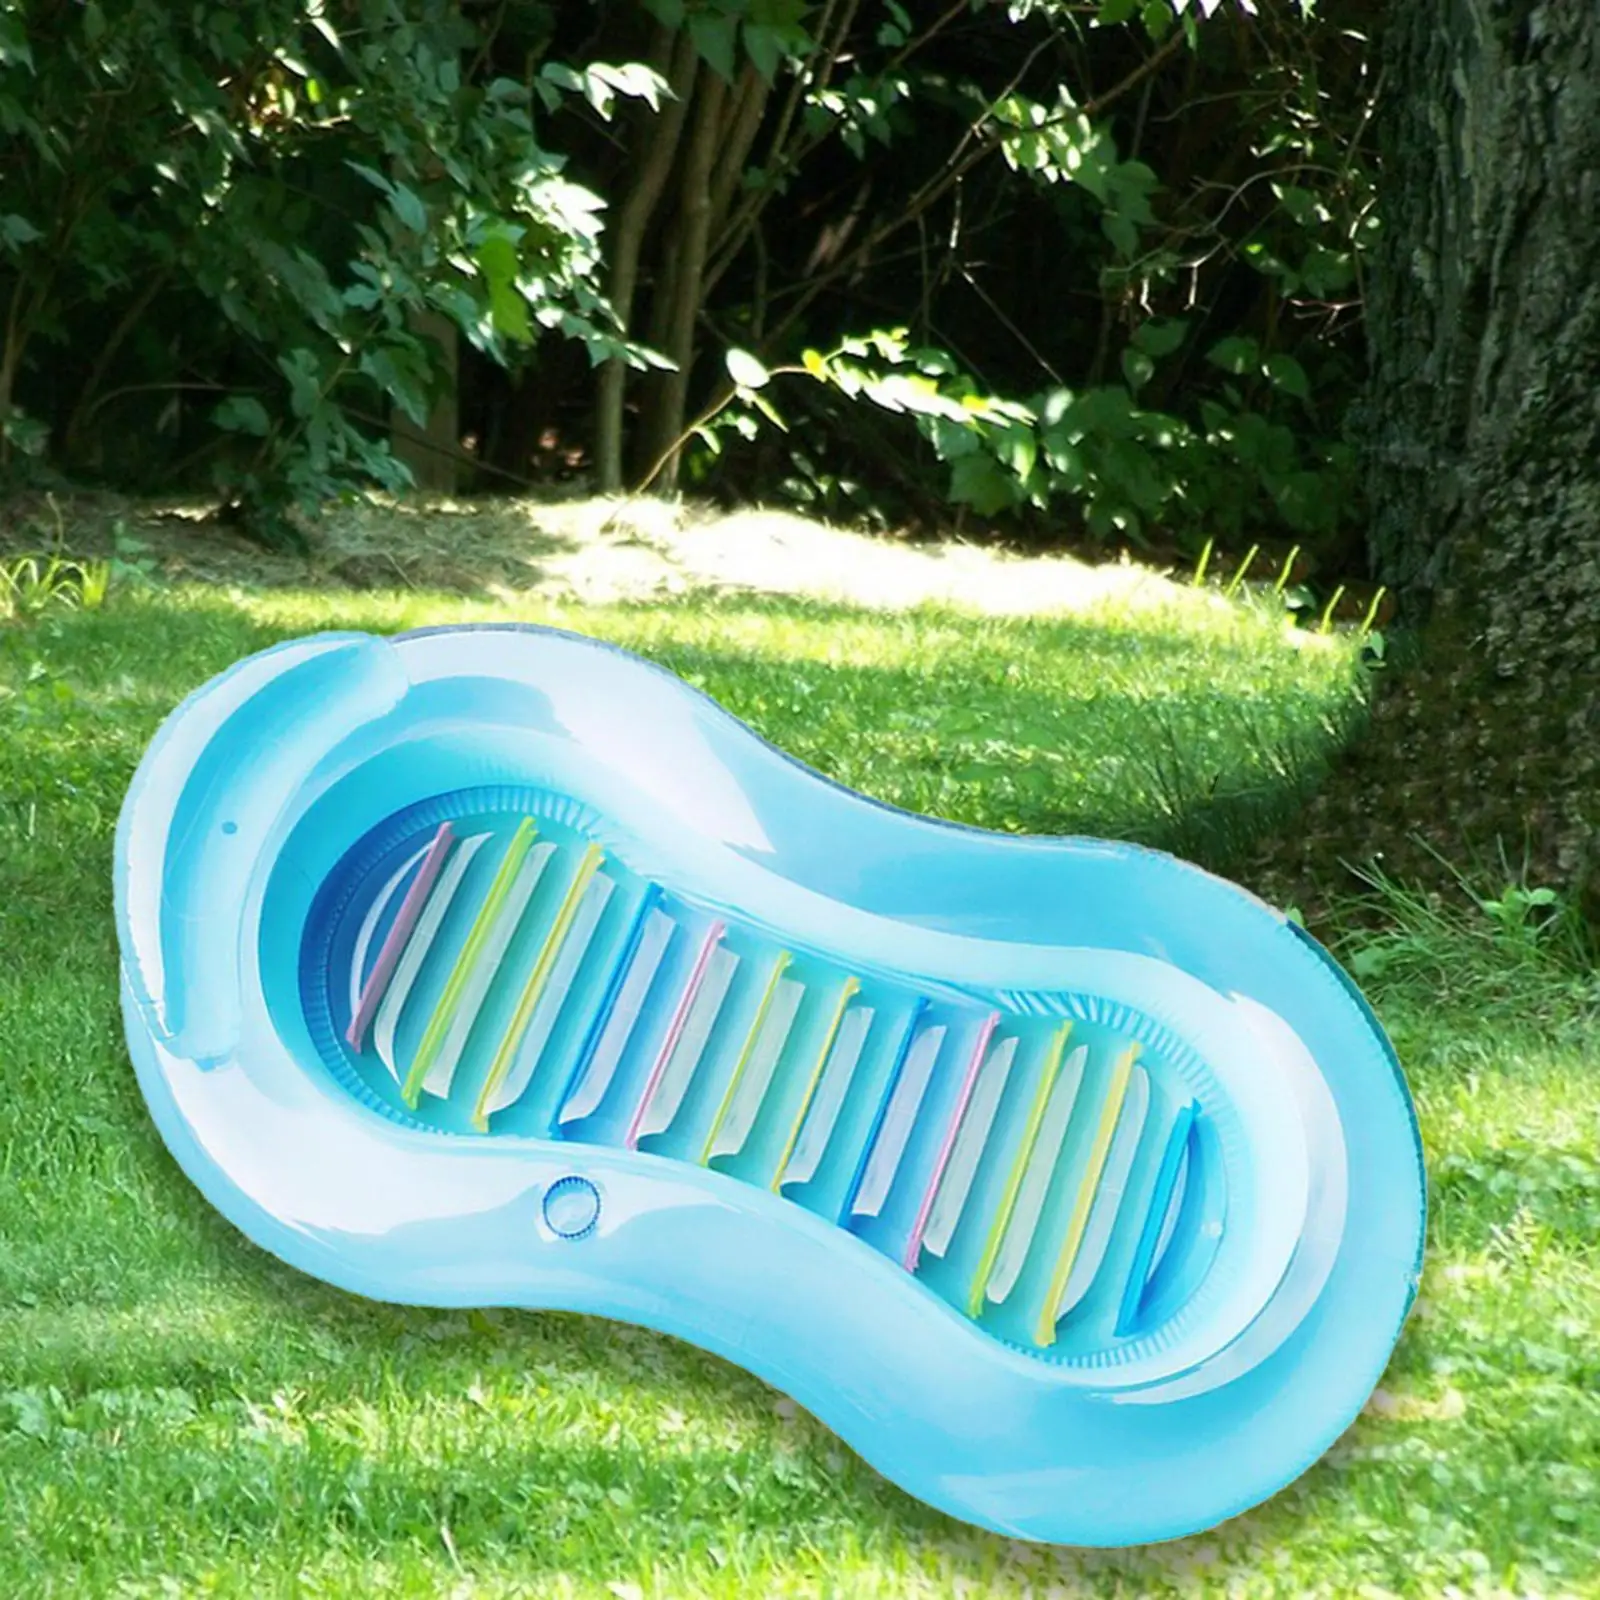 PVC Inflatable Floats Inflatable Lounge Chair Water Mattress Mat Floating Rafts Inflatable Hammock for Outdoor